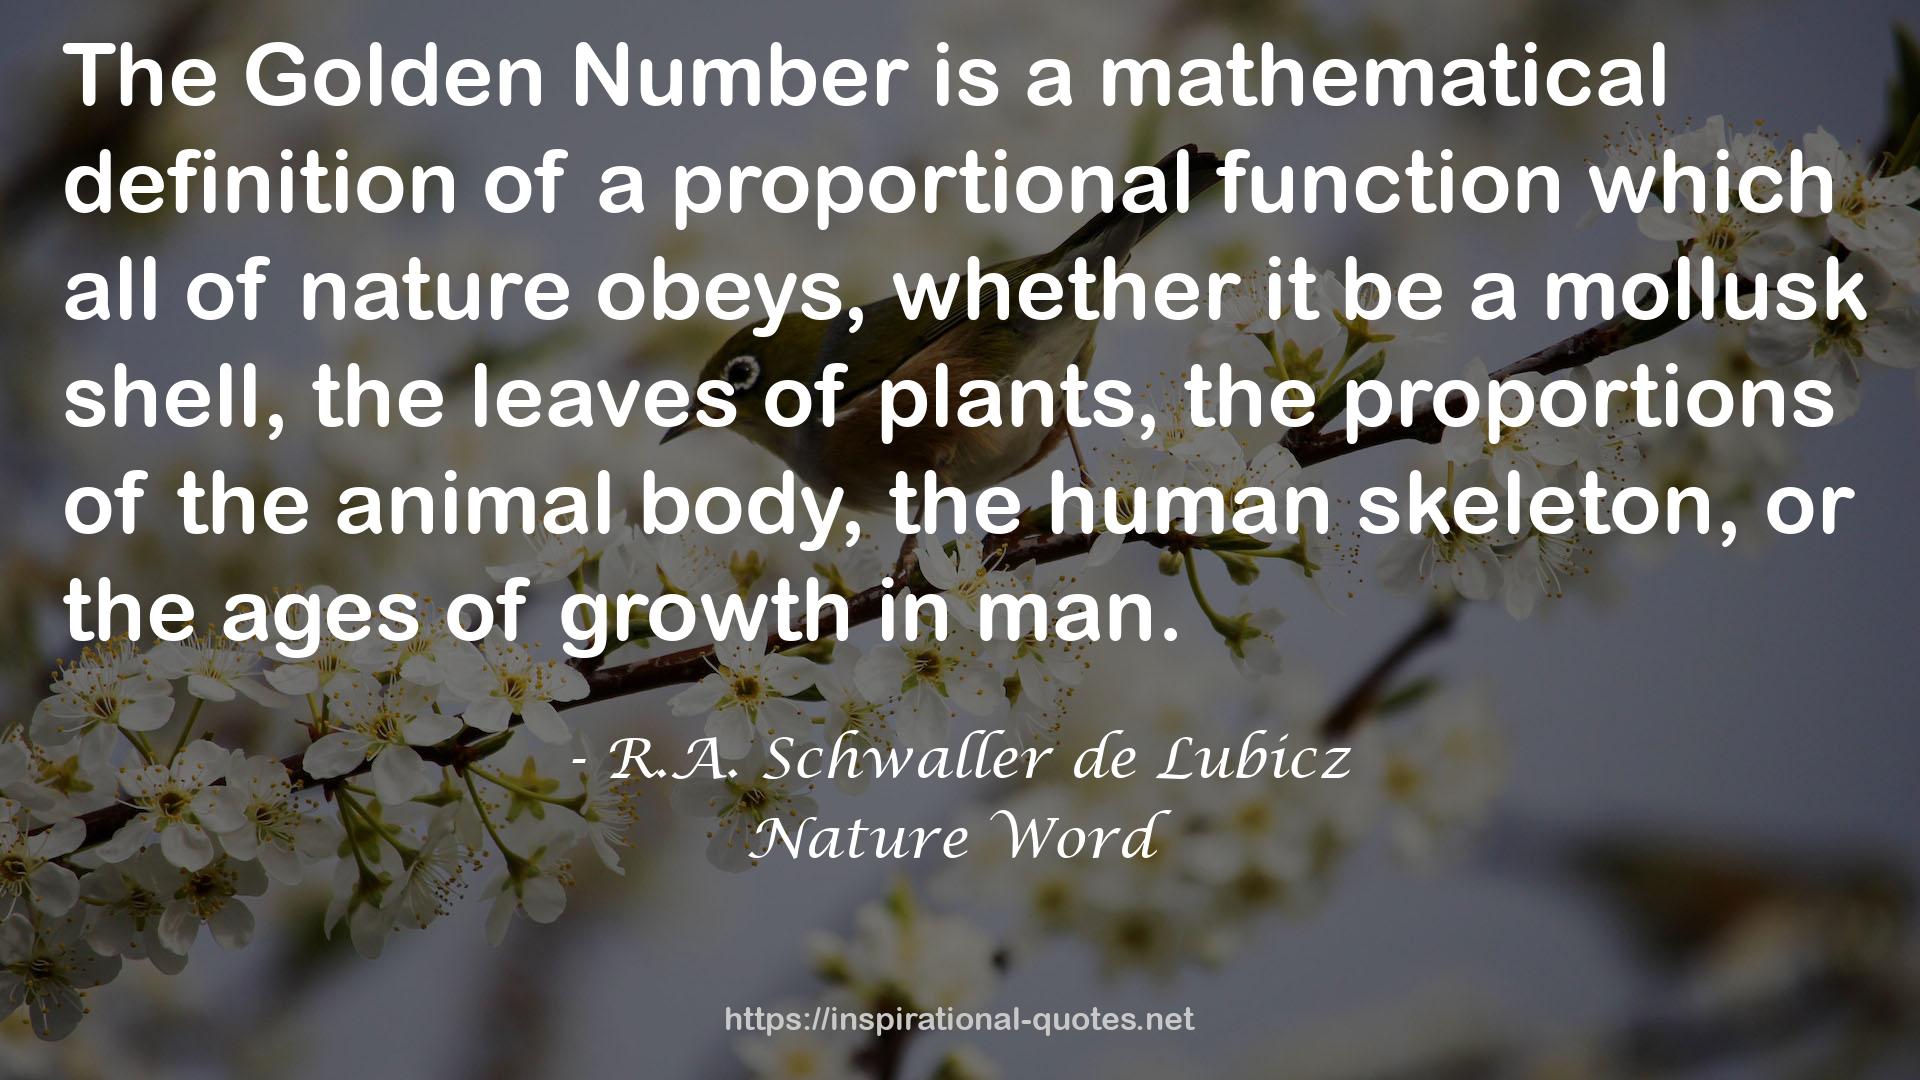 a mathematical definition  QUOTES